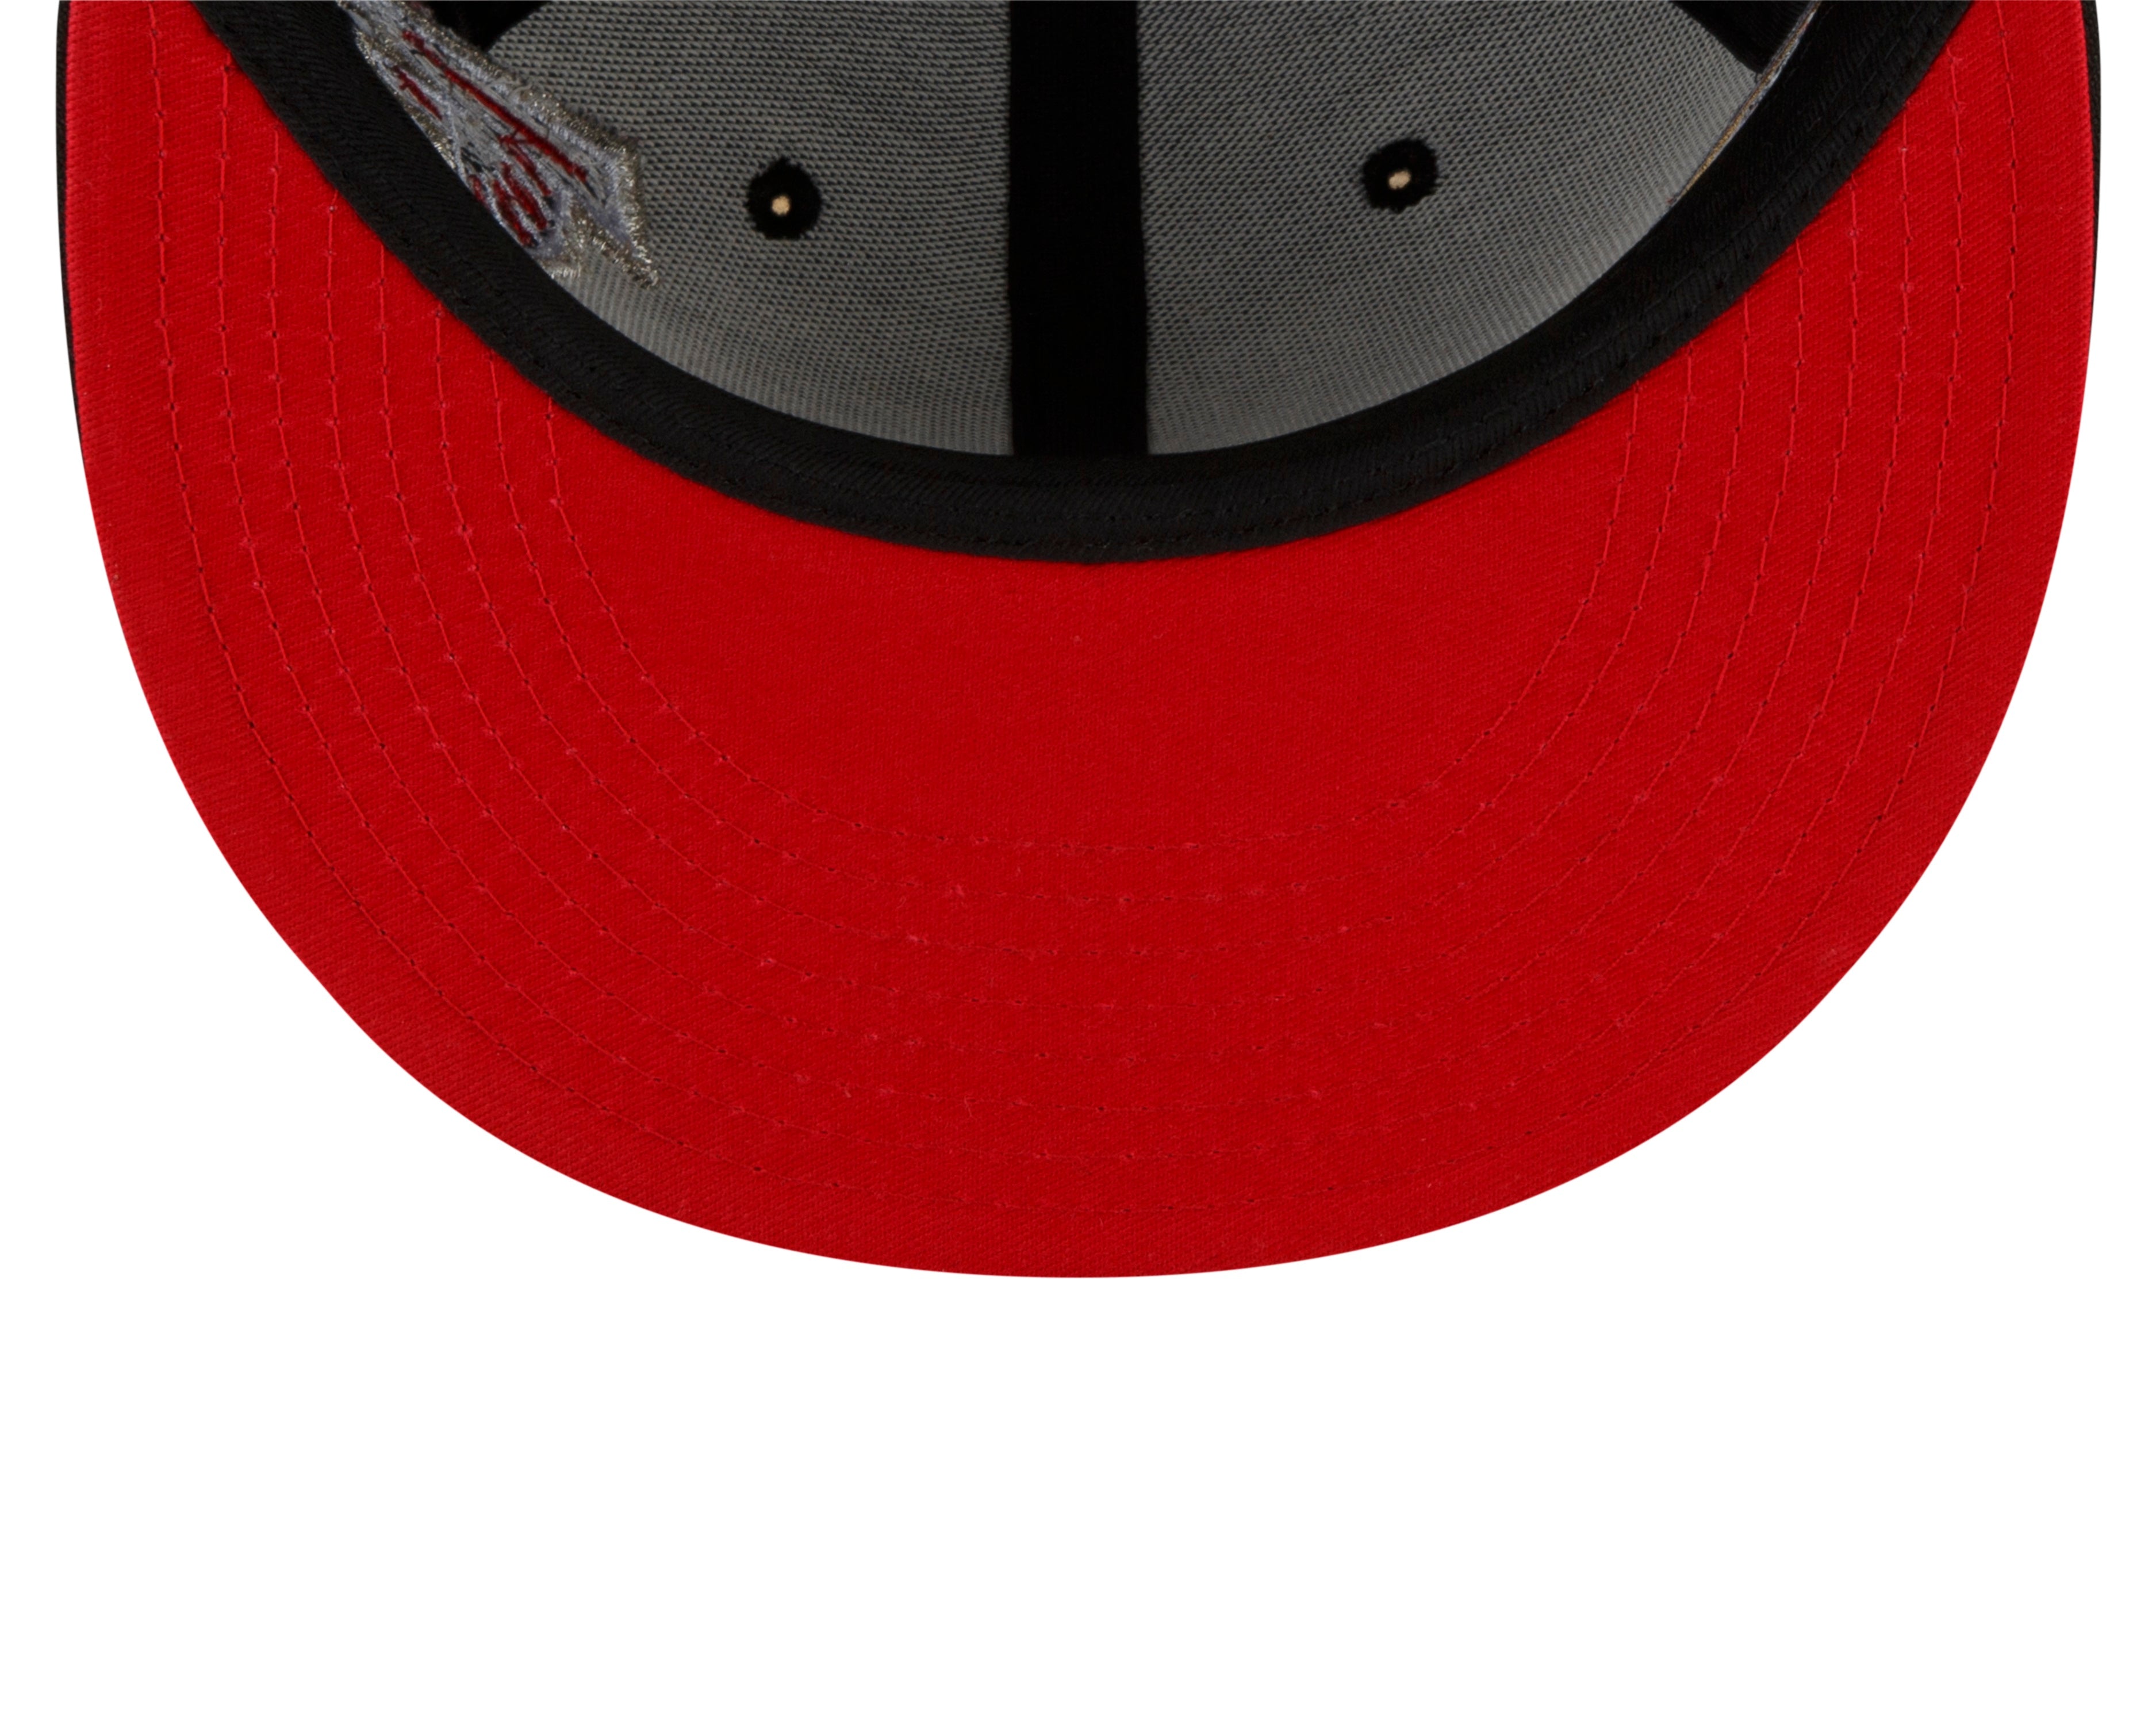 Atlanta Falcons HOME ONFIELD STADIUM Red-Black Fitted Hat